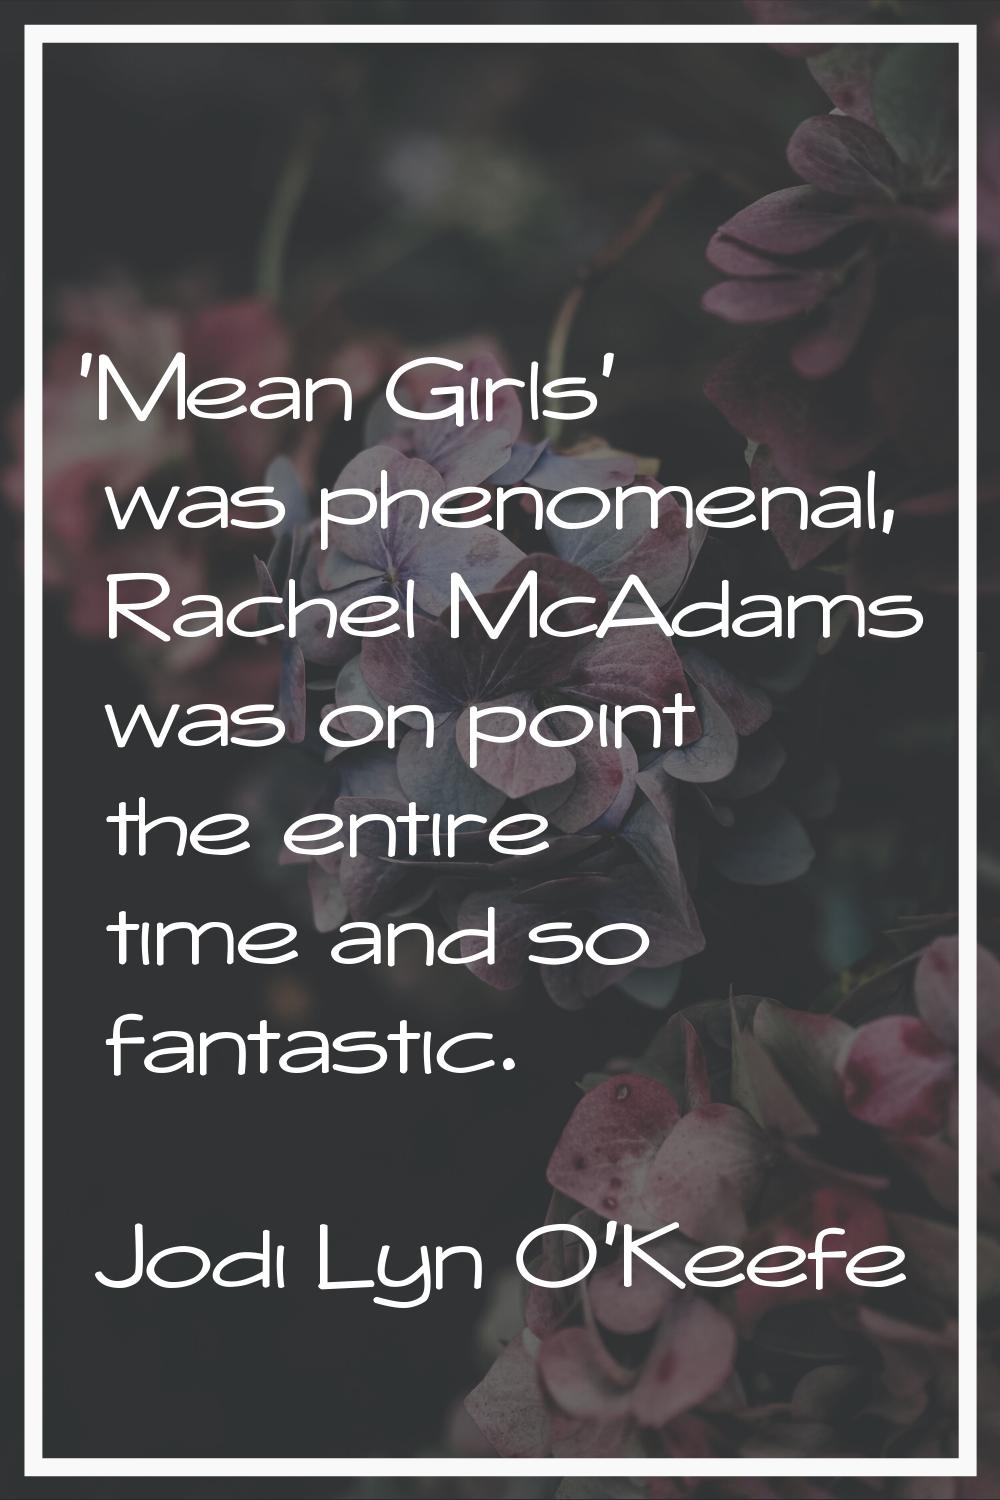 'Mean Girls' was phenomenal, Rachel McAdams was on point the entire time and so fantastic.